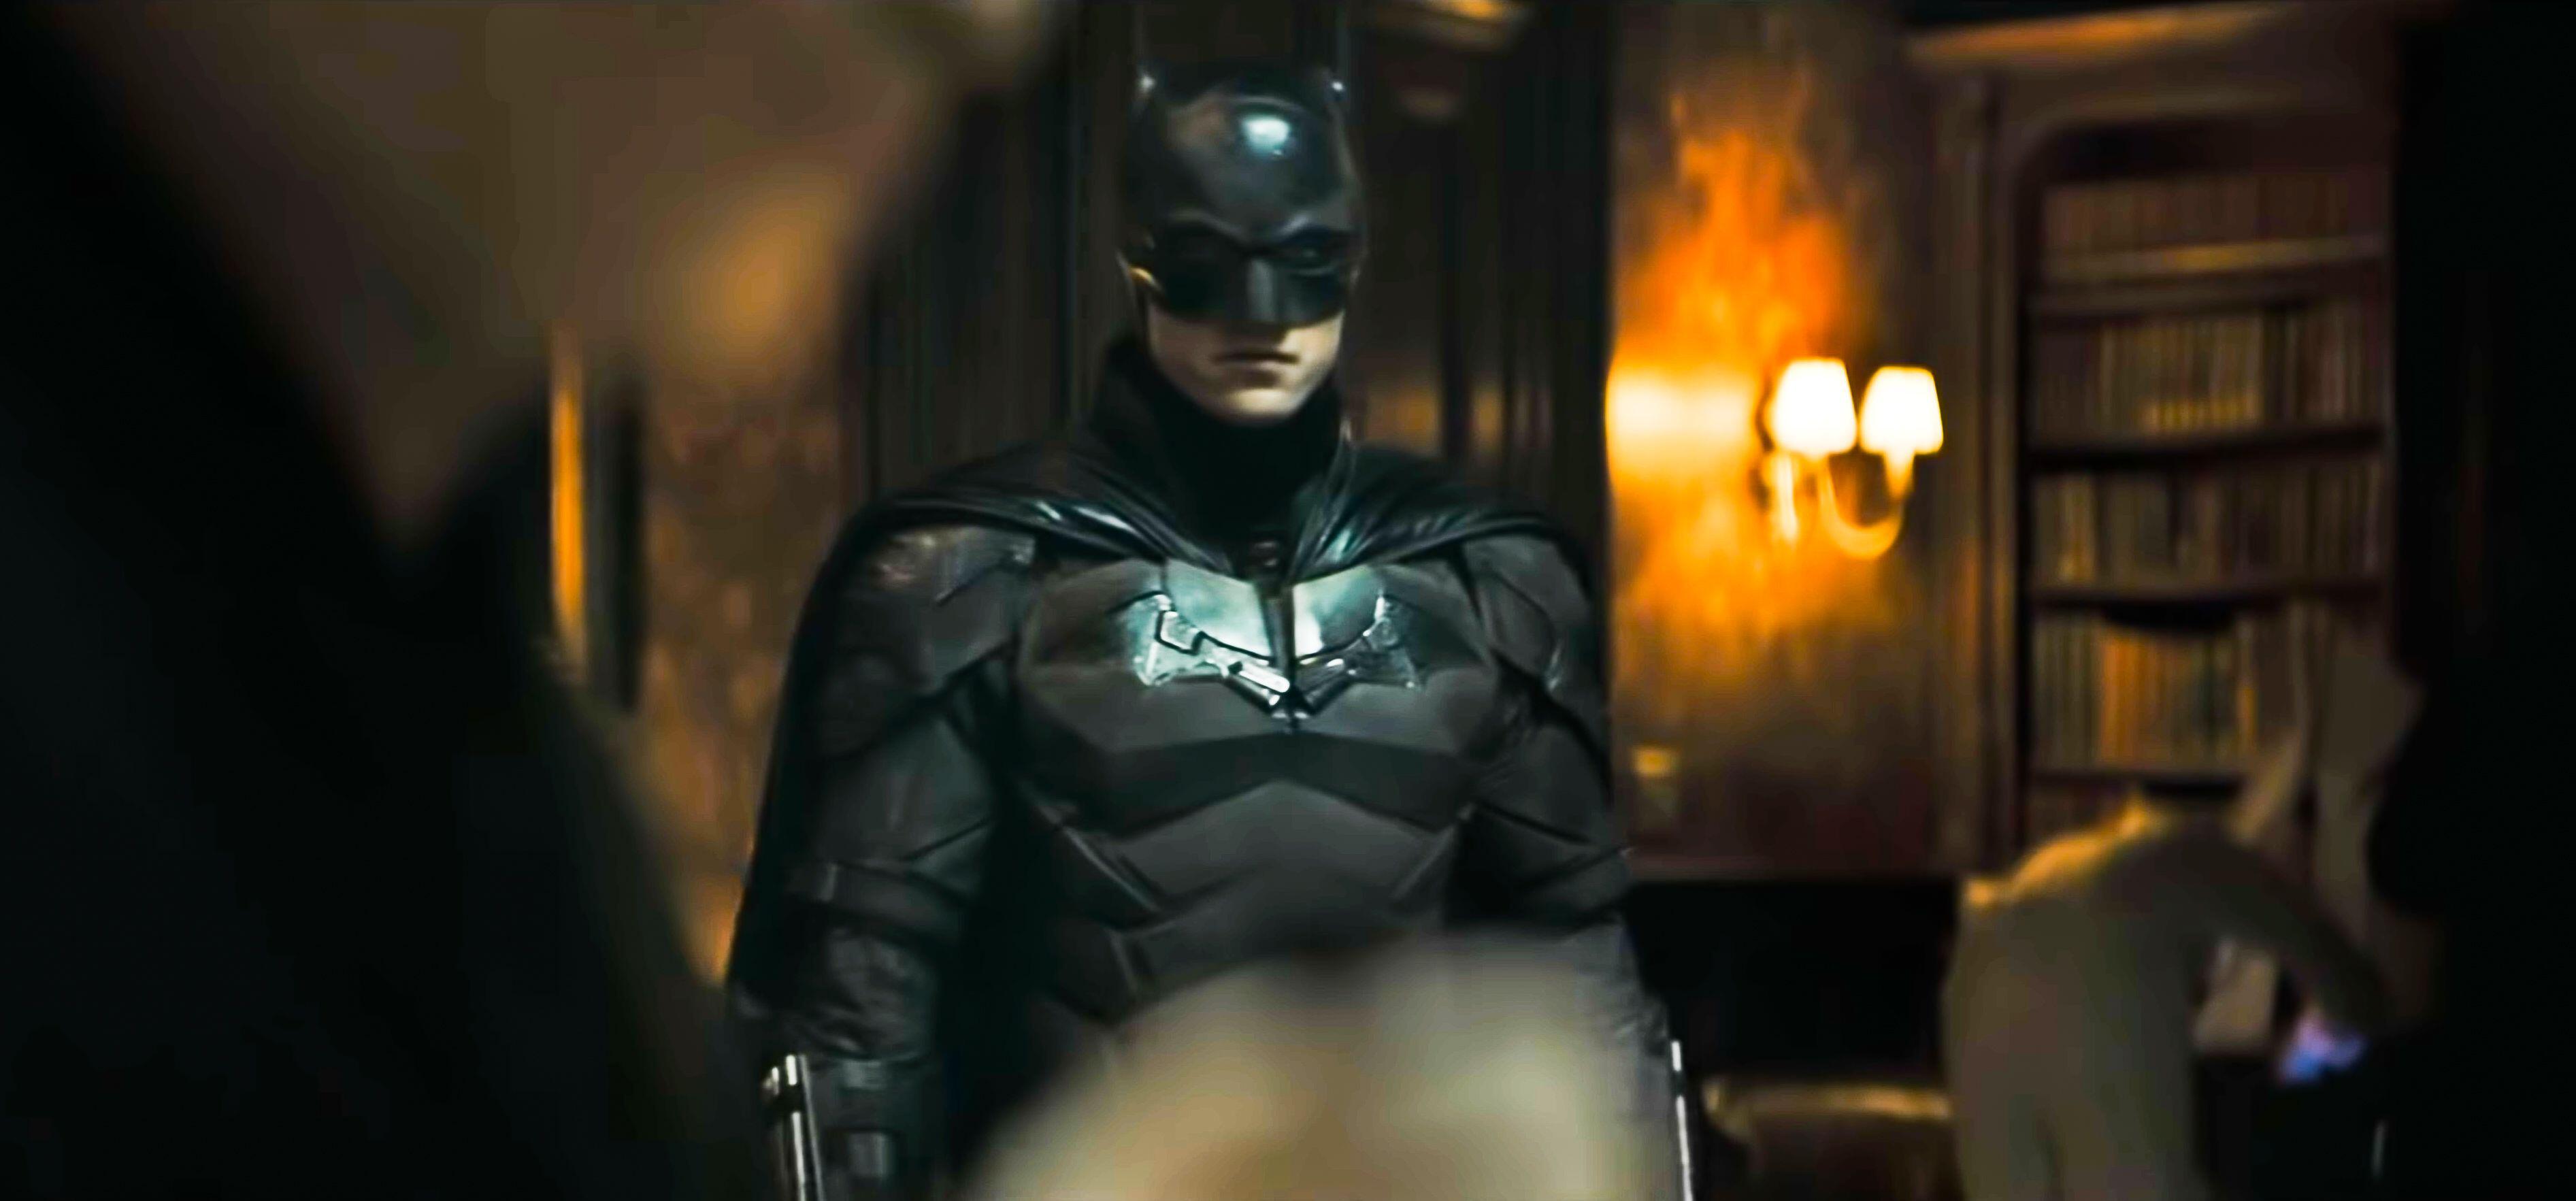 The Batman movie rating overturned - but only in one city | The Independent